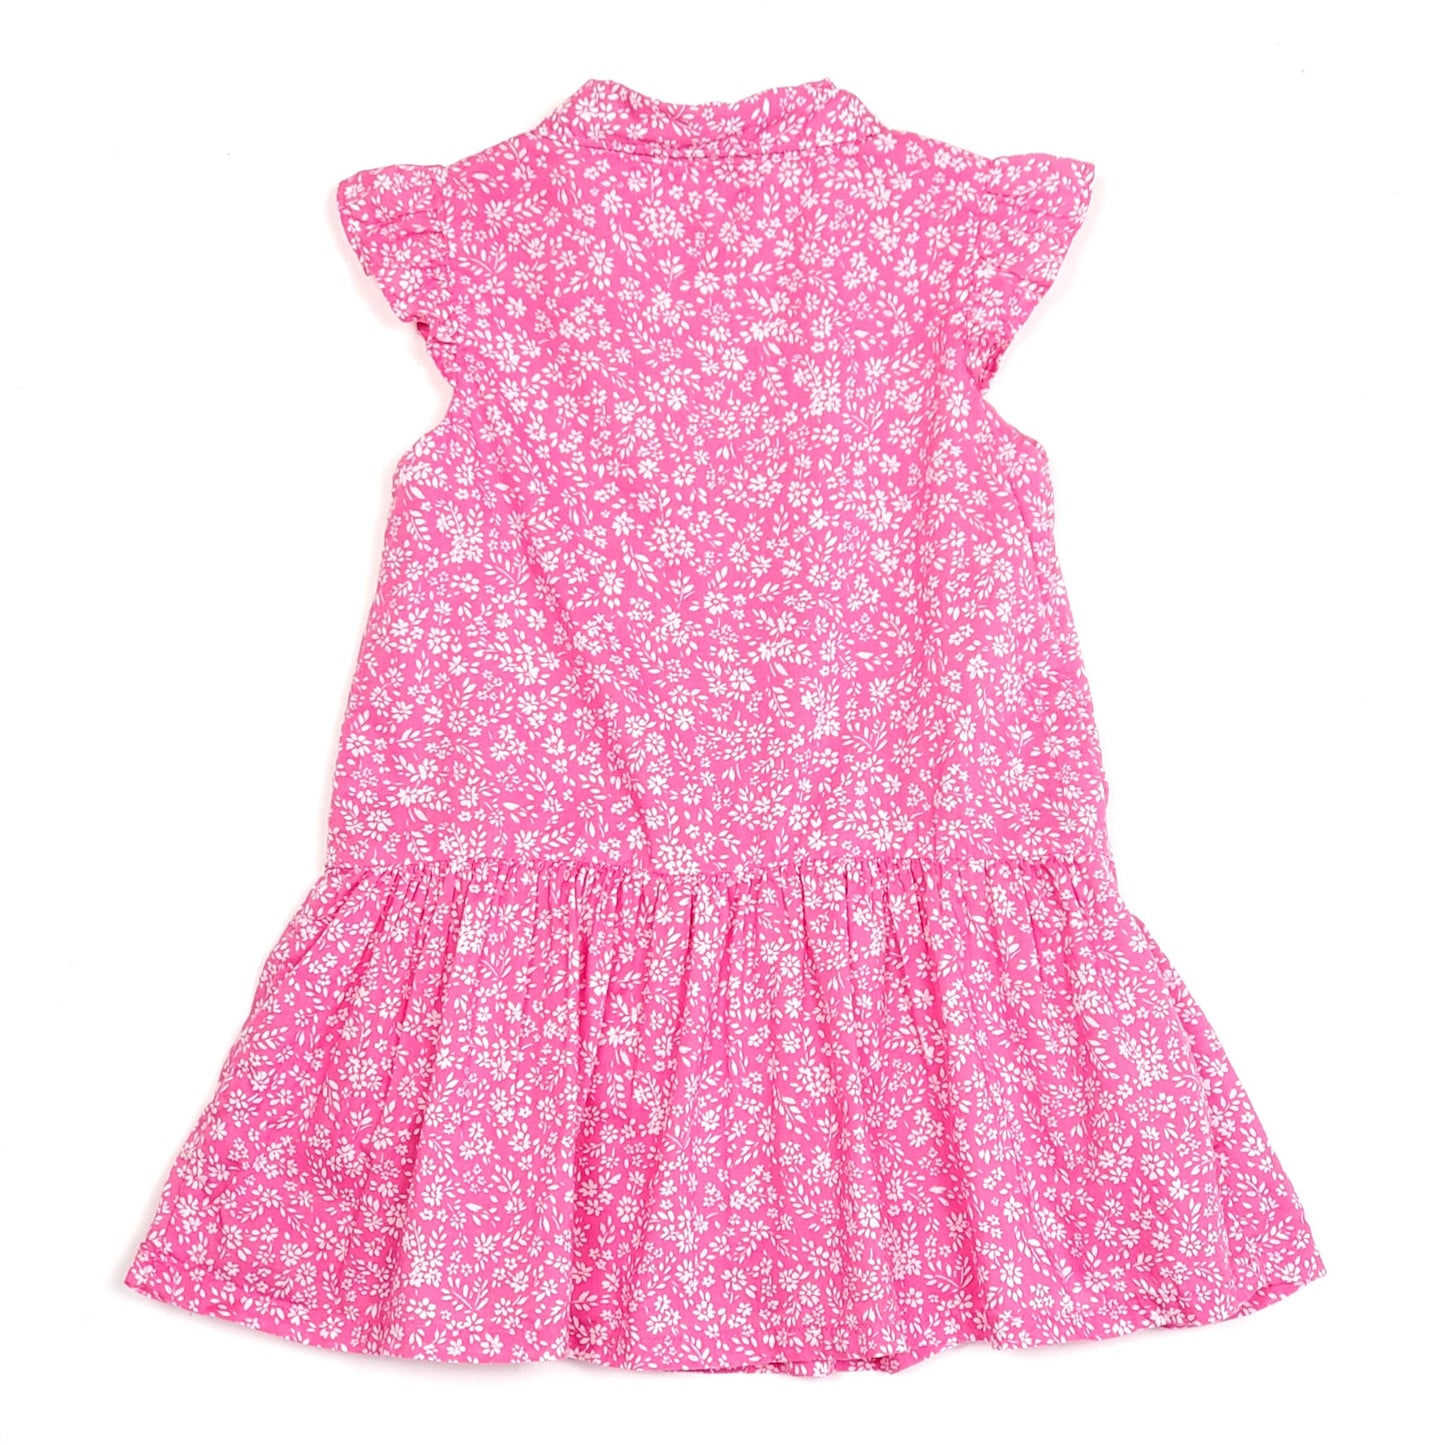 Baby Gap Girls Pink White Floral Dress 2T Used, back